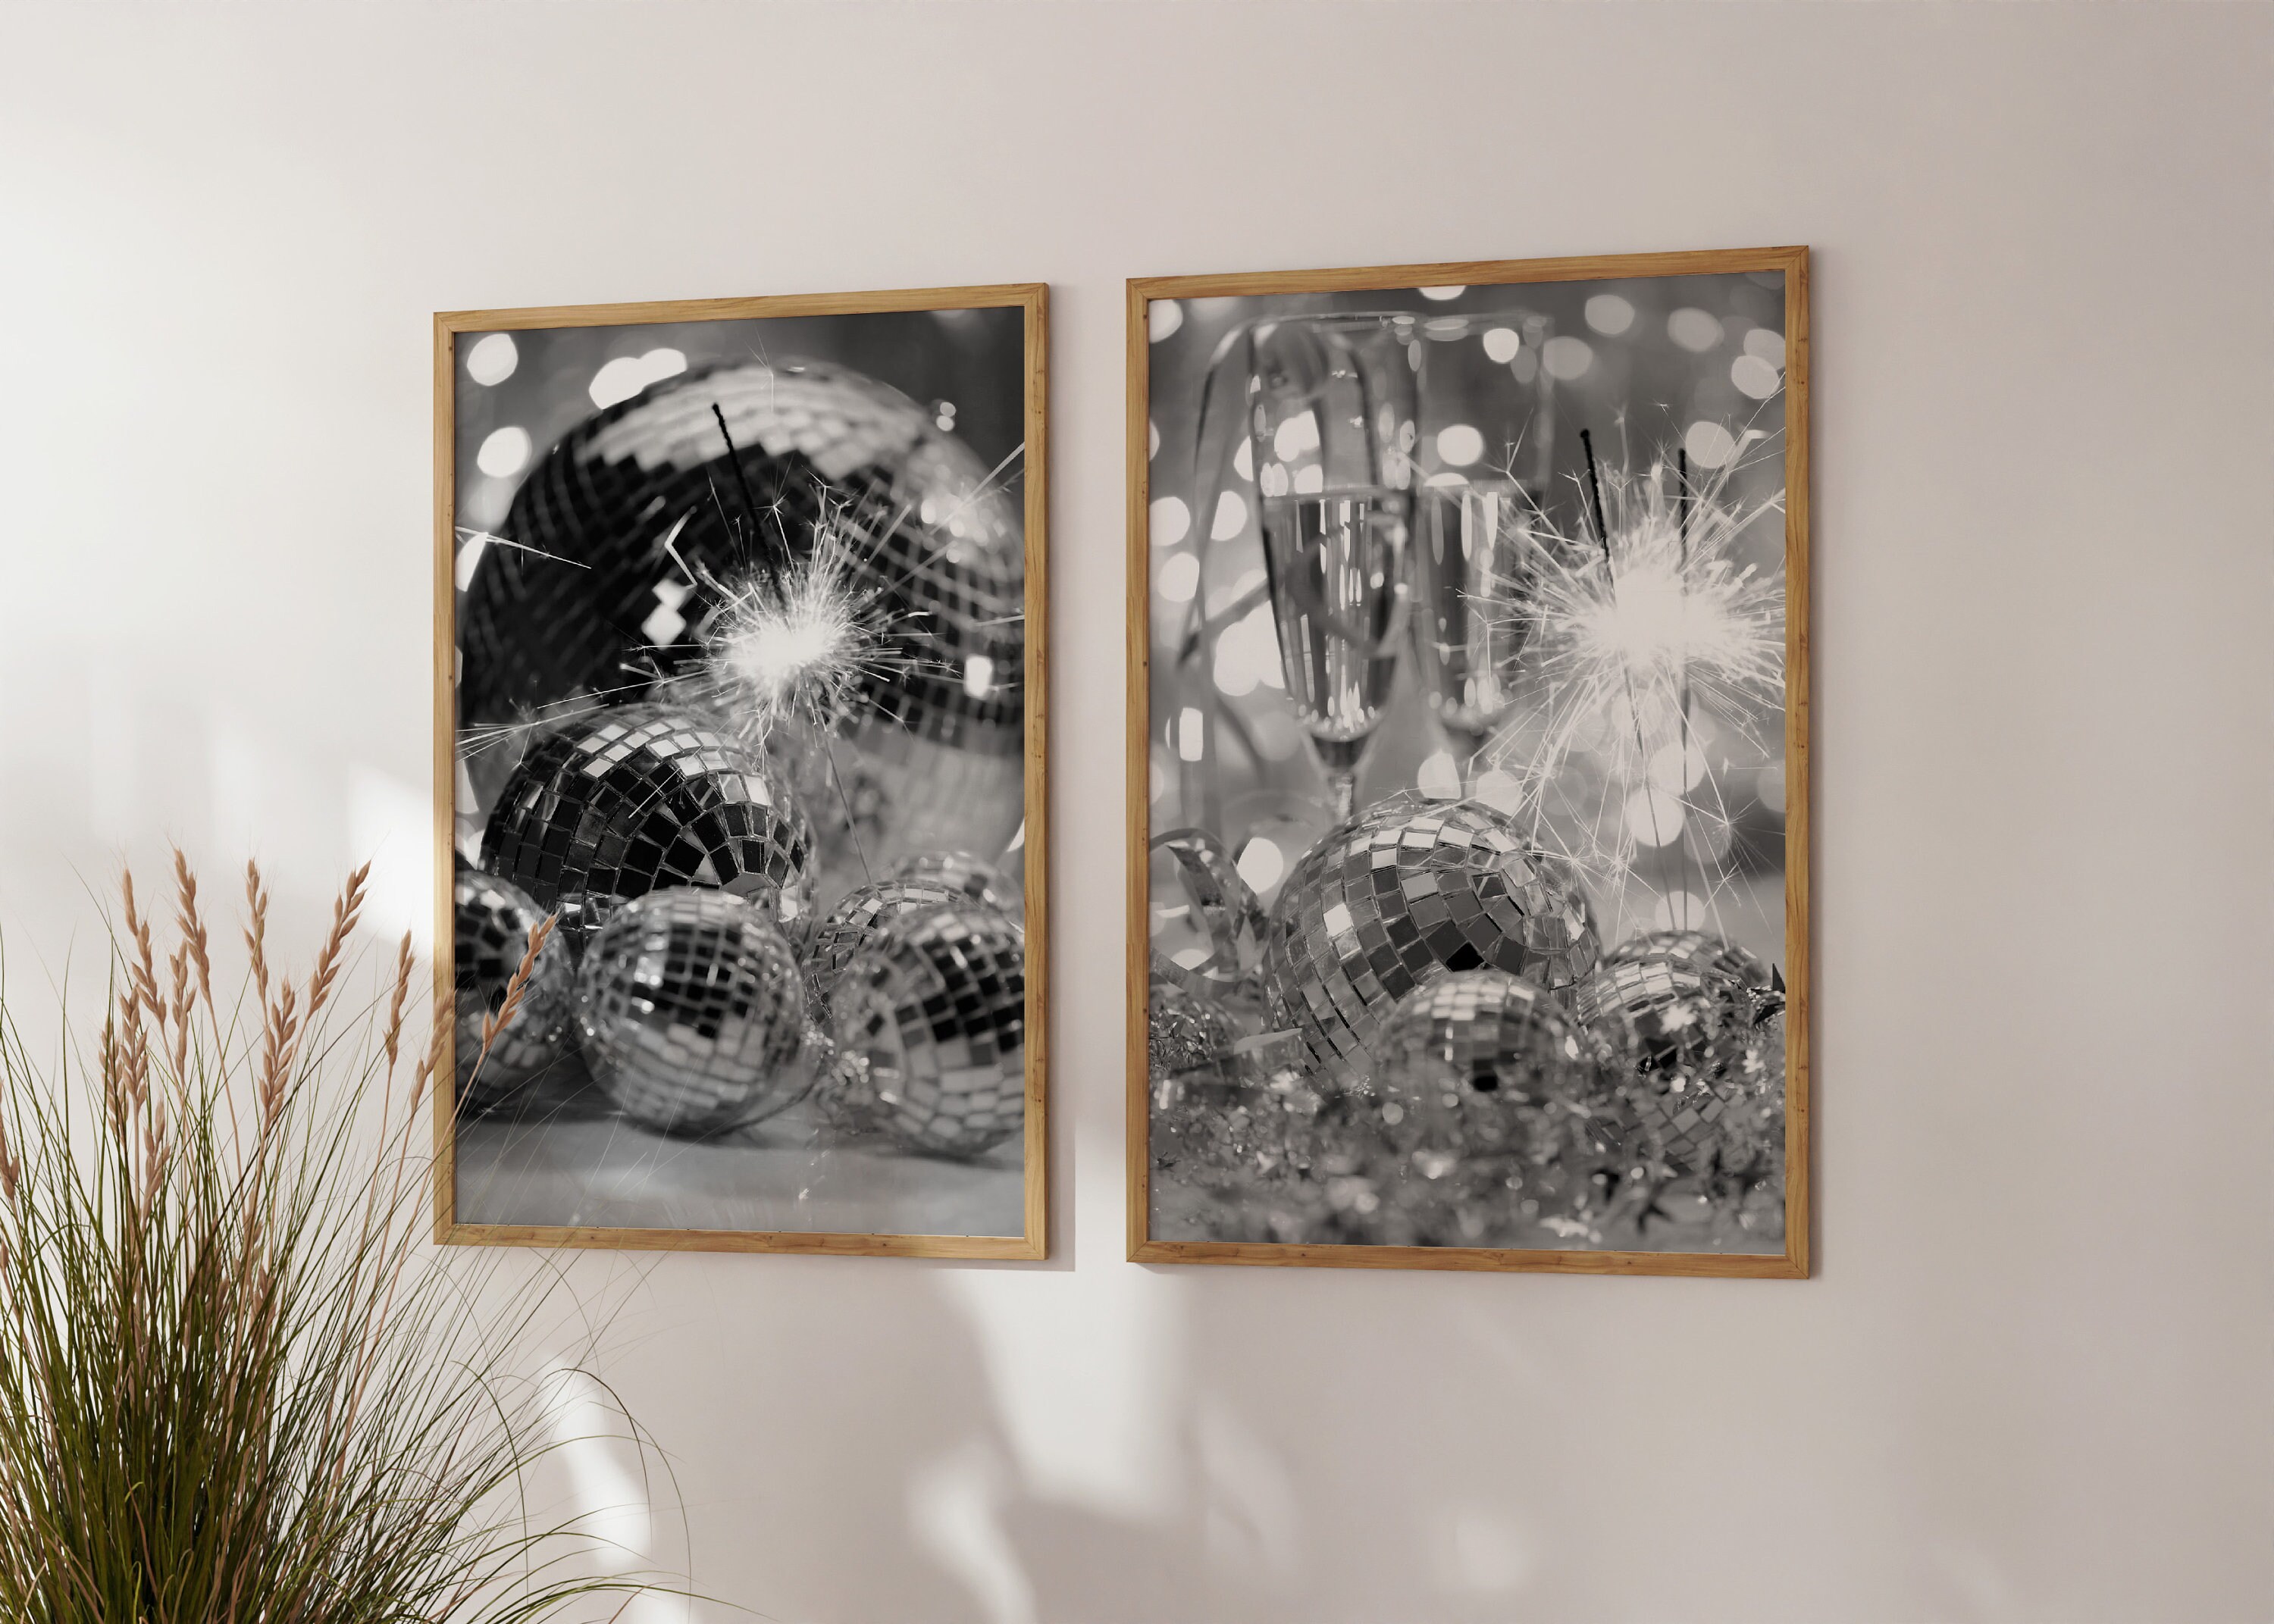 Disco ball Poster for Sale by flinning